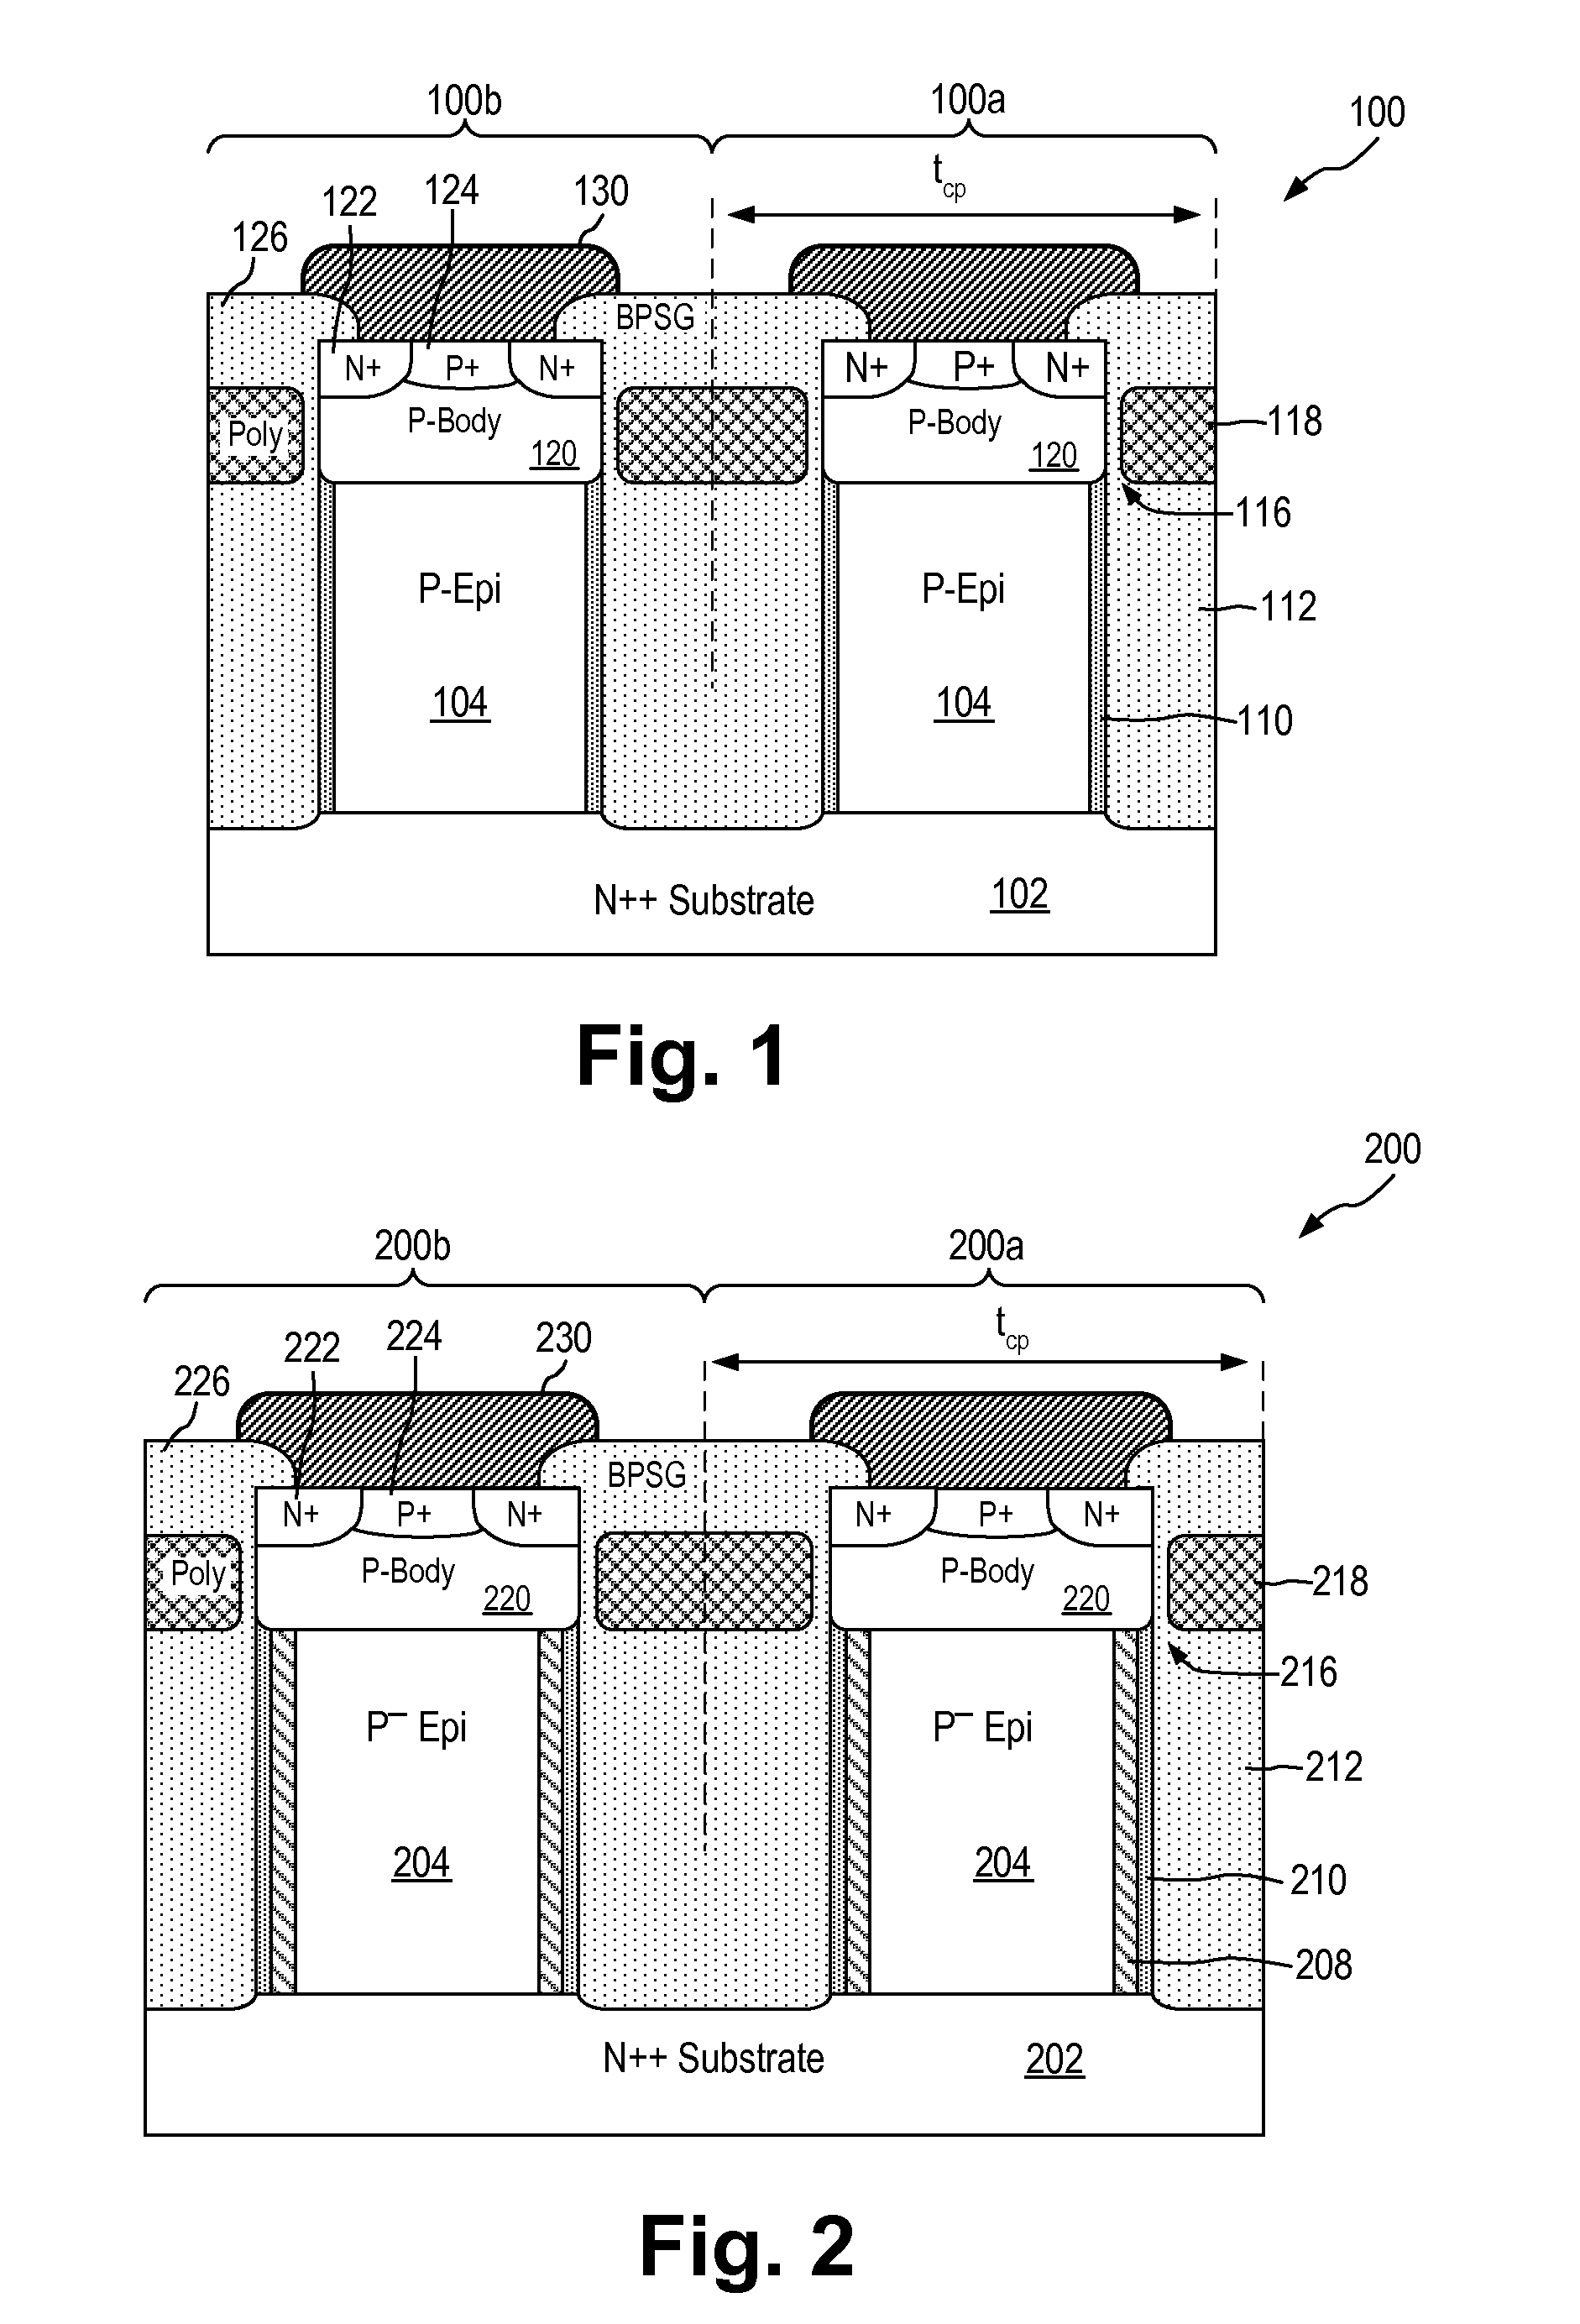 Method for Forming Nanotube Semiconductor Devices